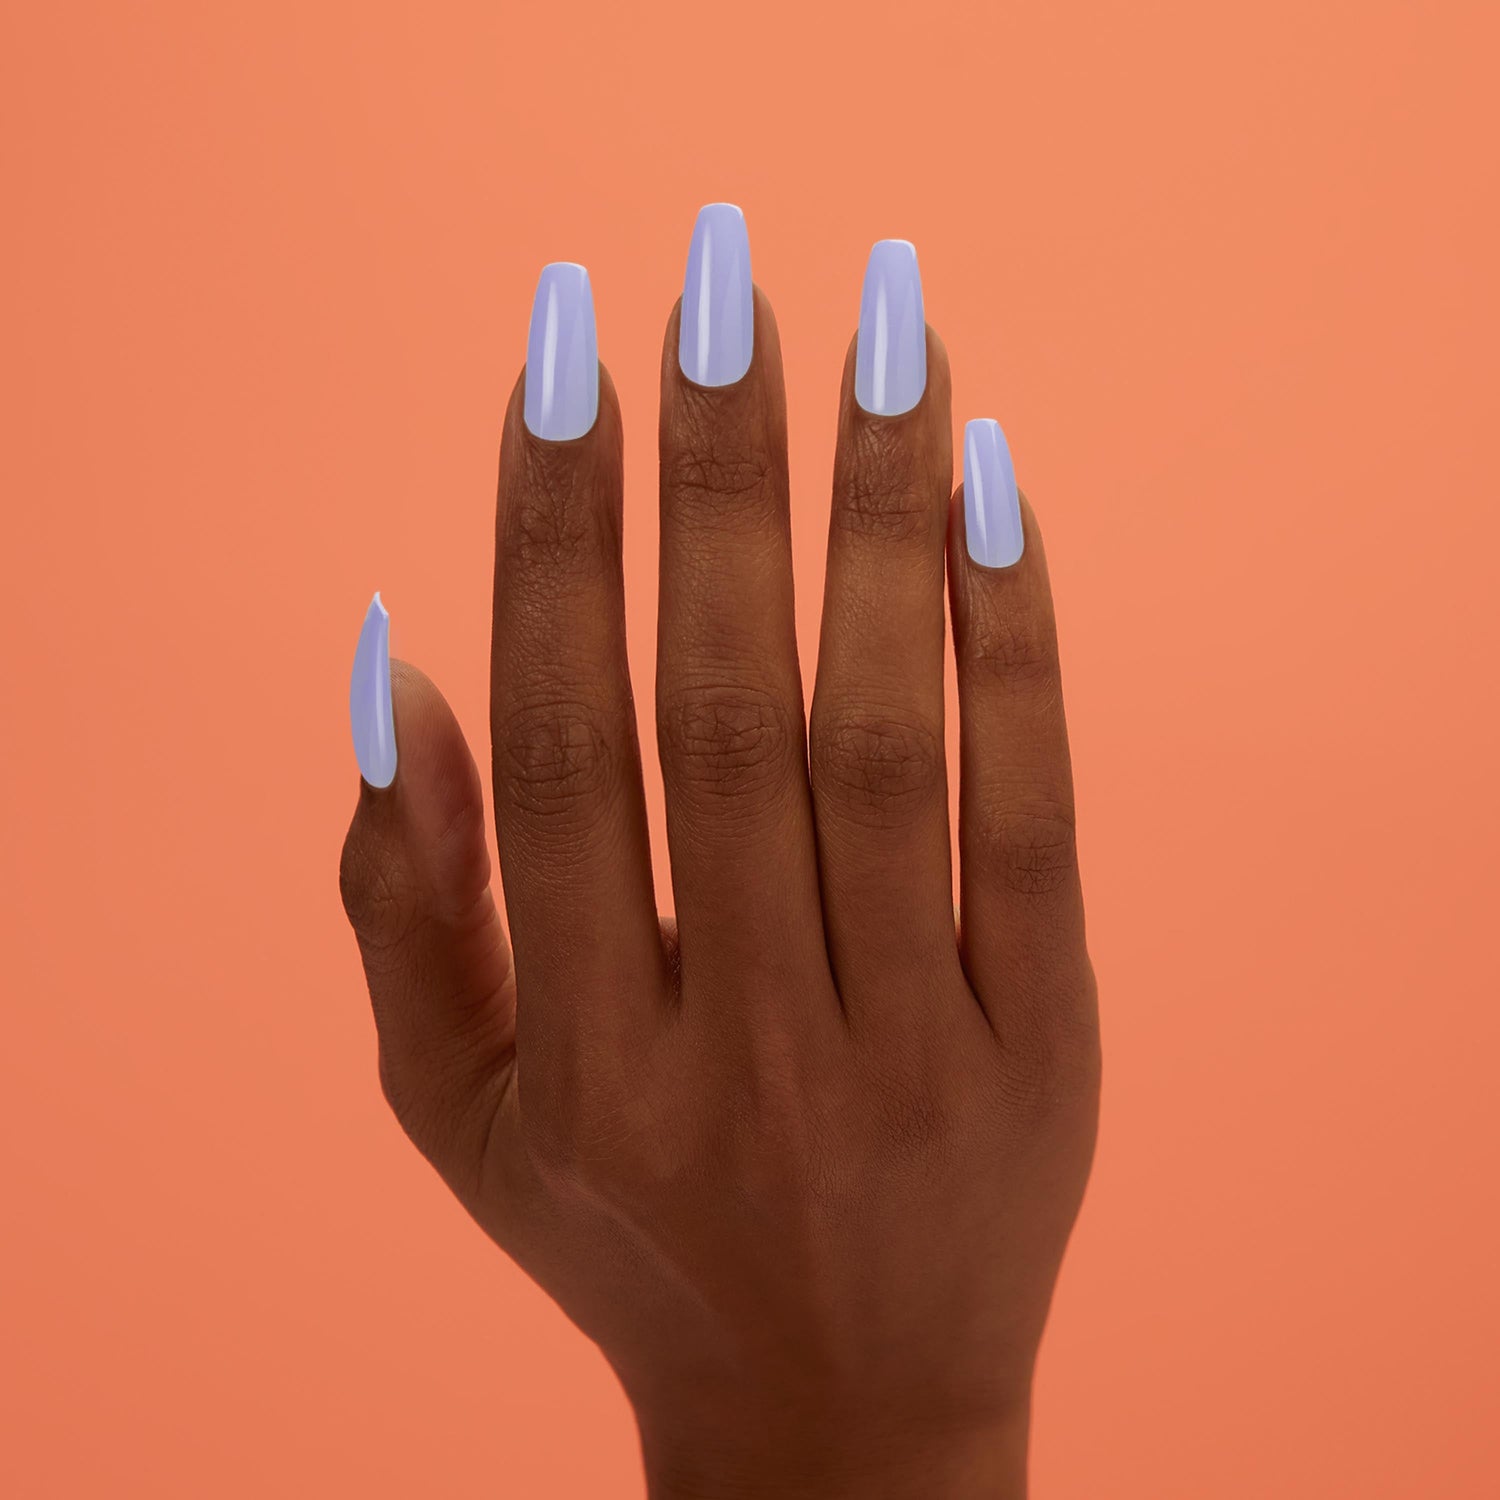 Indie Cloudy Blue. Light Blue Nail Polish for Nail Art Cloudy Blue - Price  in India, Buy Indie Cloudy Blue. Light Blue Nail Polish for Nail Art Cloudy  Blue Online In India,